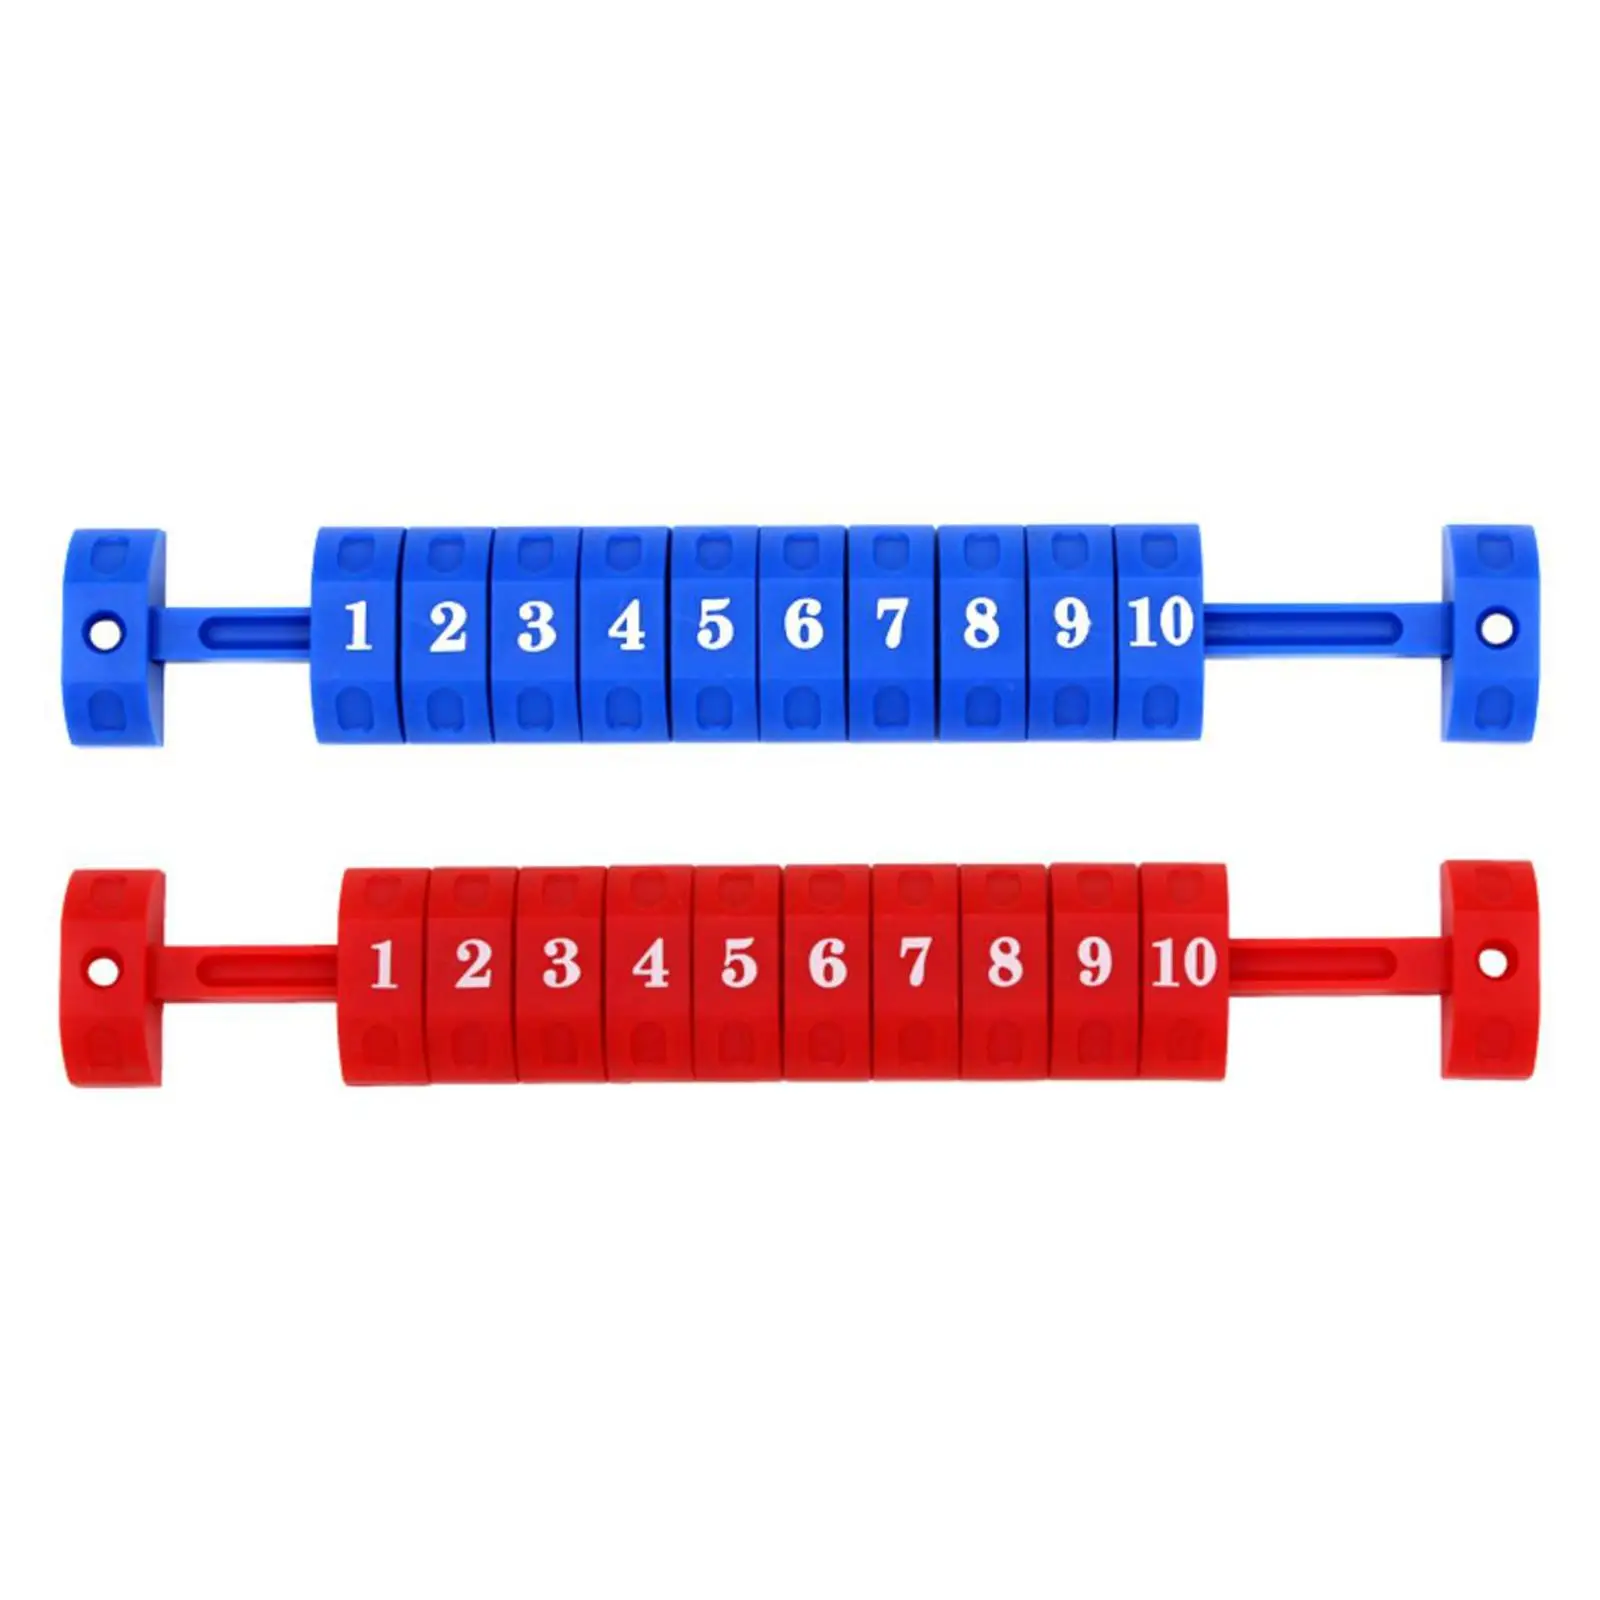 2Pcs Foosball Scoreboard Counters Keepers Indicator Scoring Units for Gaming Room Sports Goods Football Machine Accessories